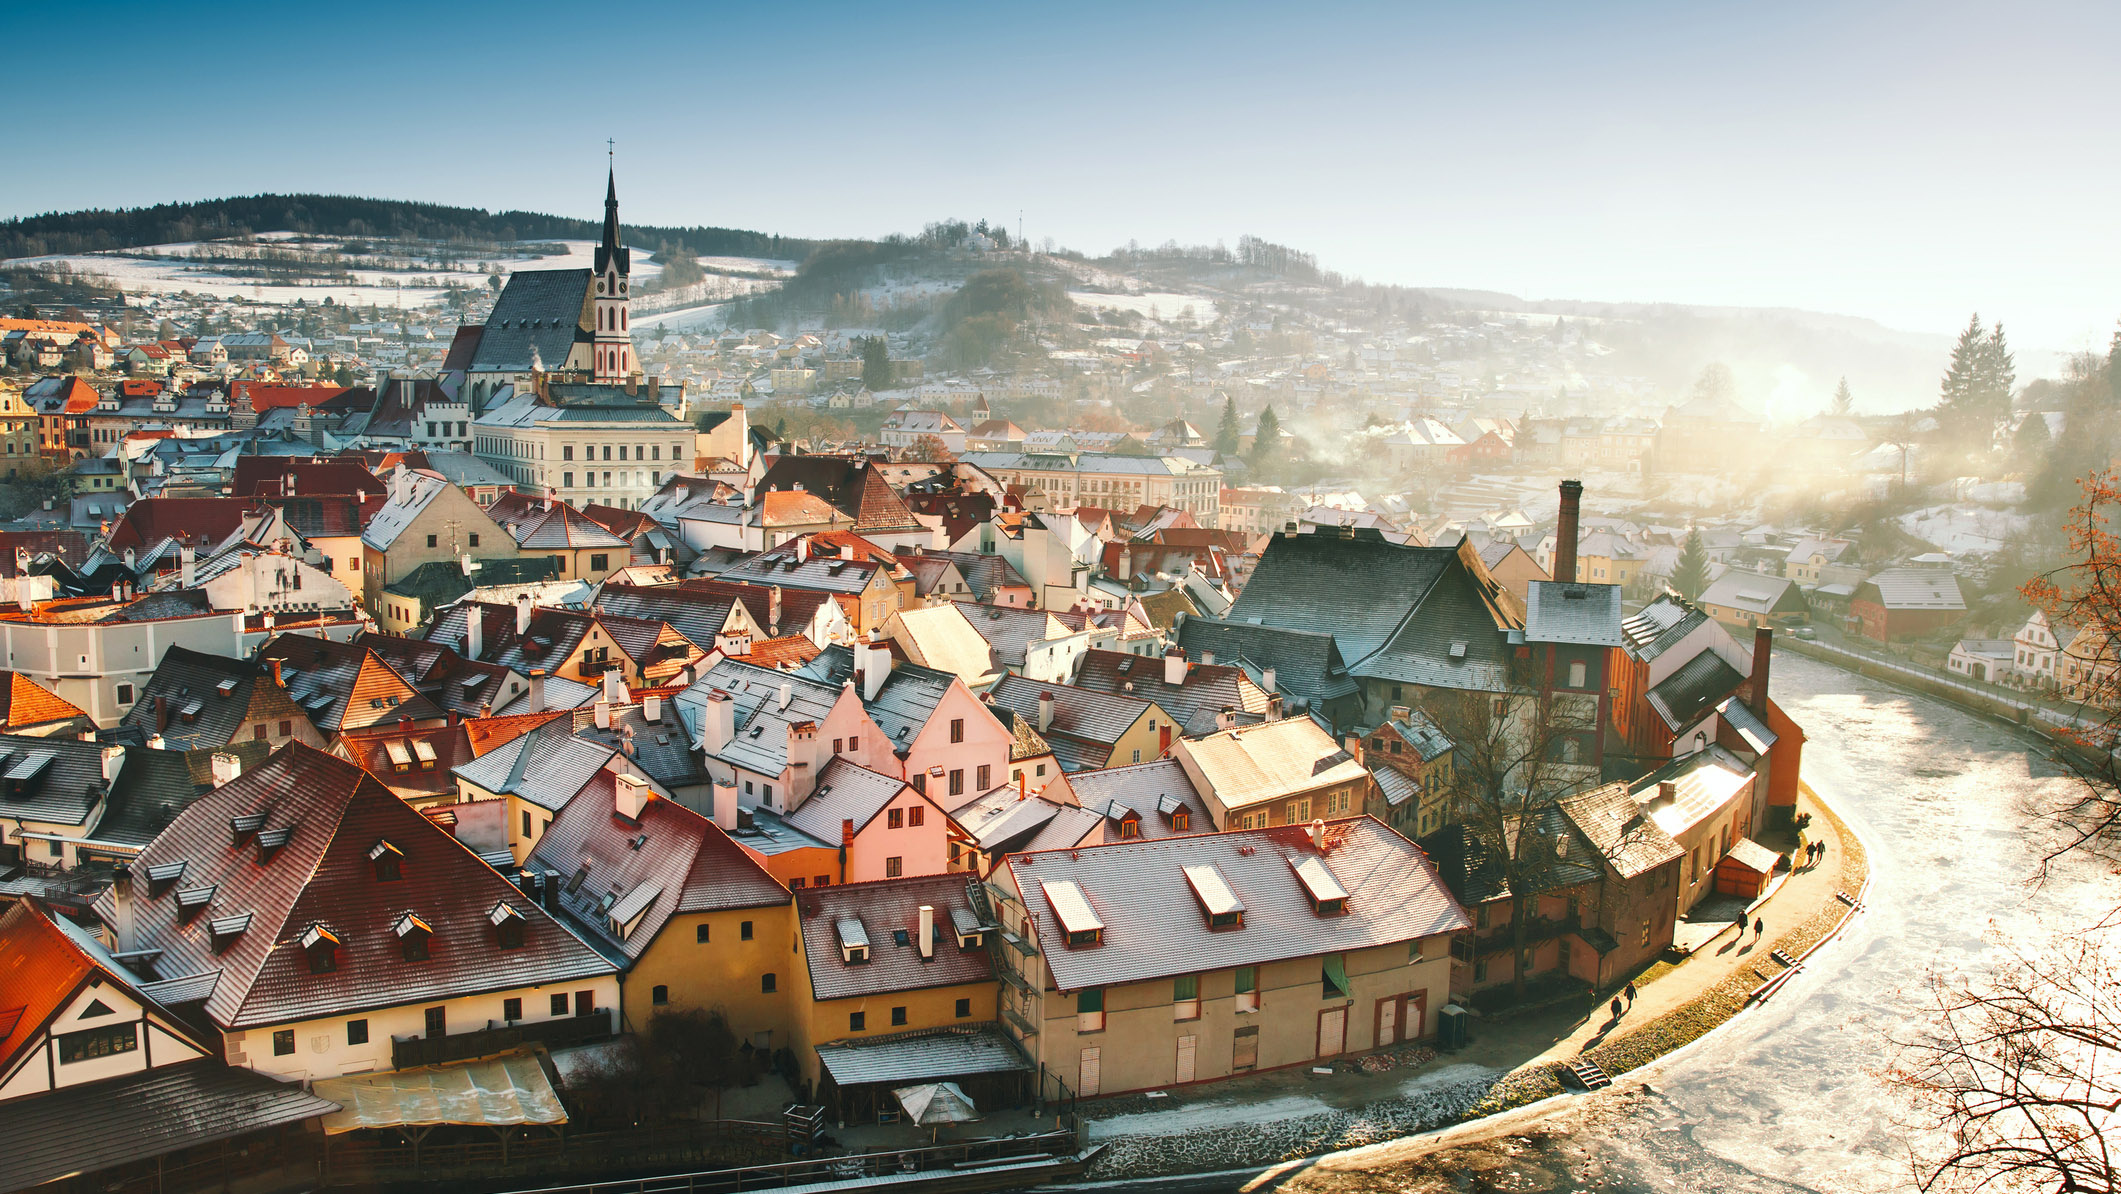 Czechia (Czech Republic): One of the most picturesque towns in Europe, Cesky Krumlov. 2130x1200 HD Wallpaper.